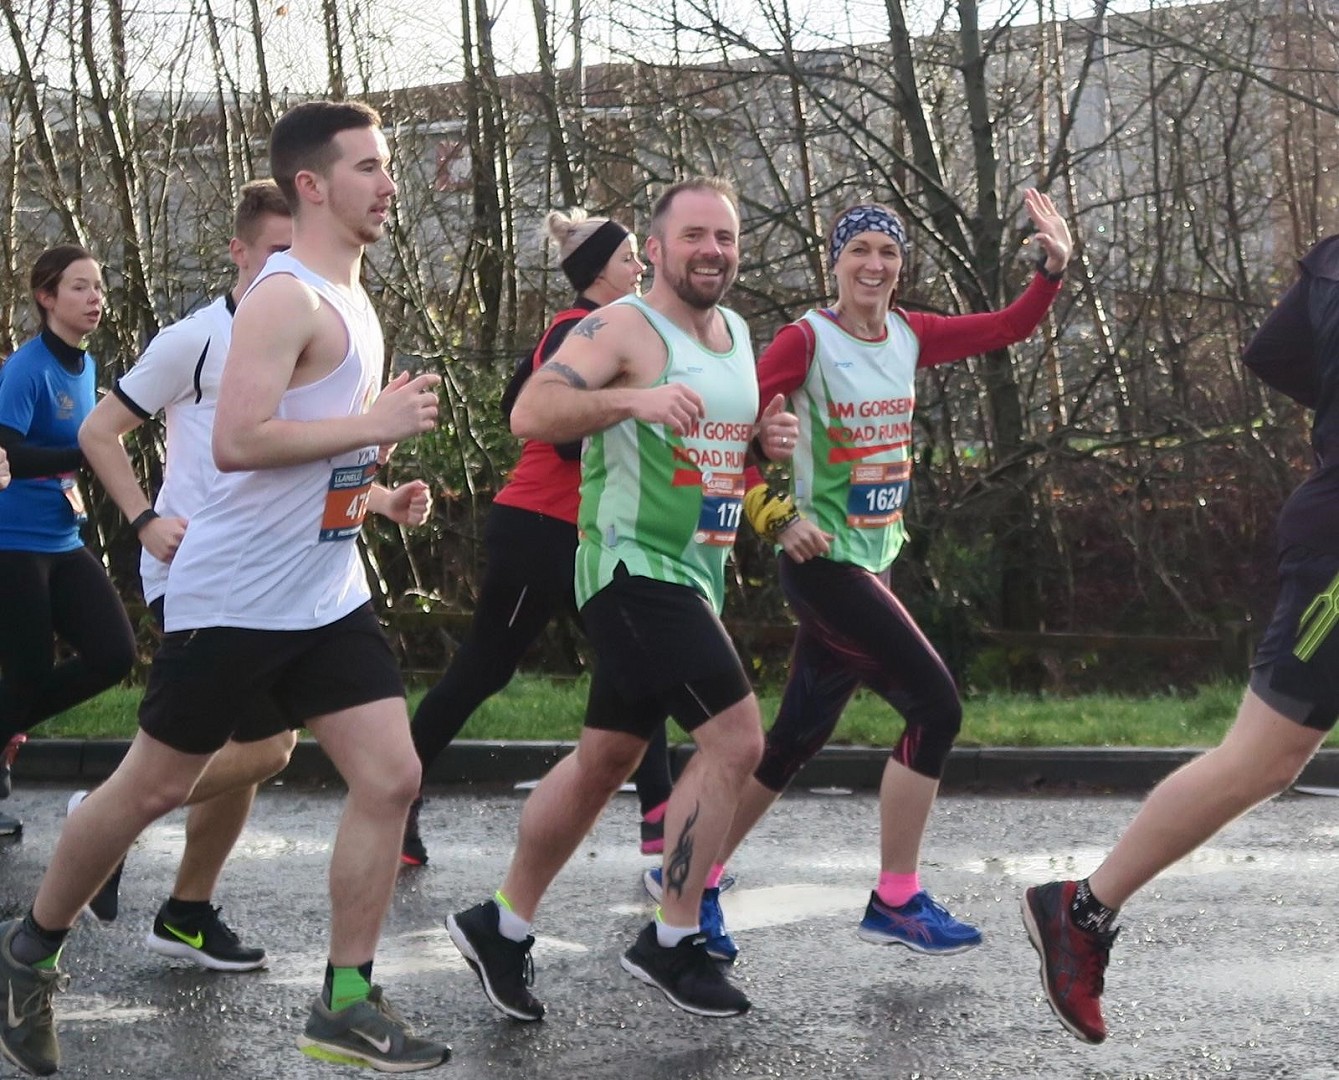 The Runners Journey to Achieving a Sub-2 Hour Half Marathon